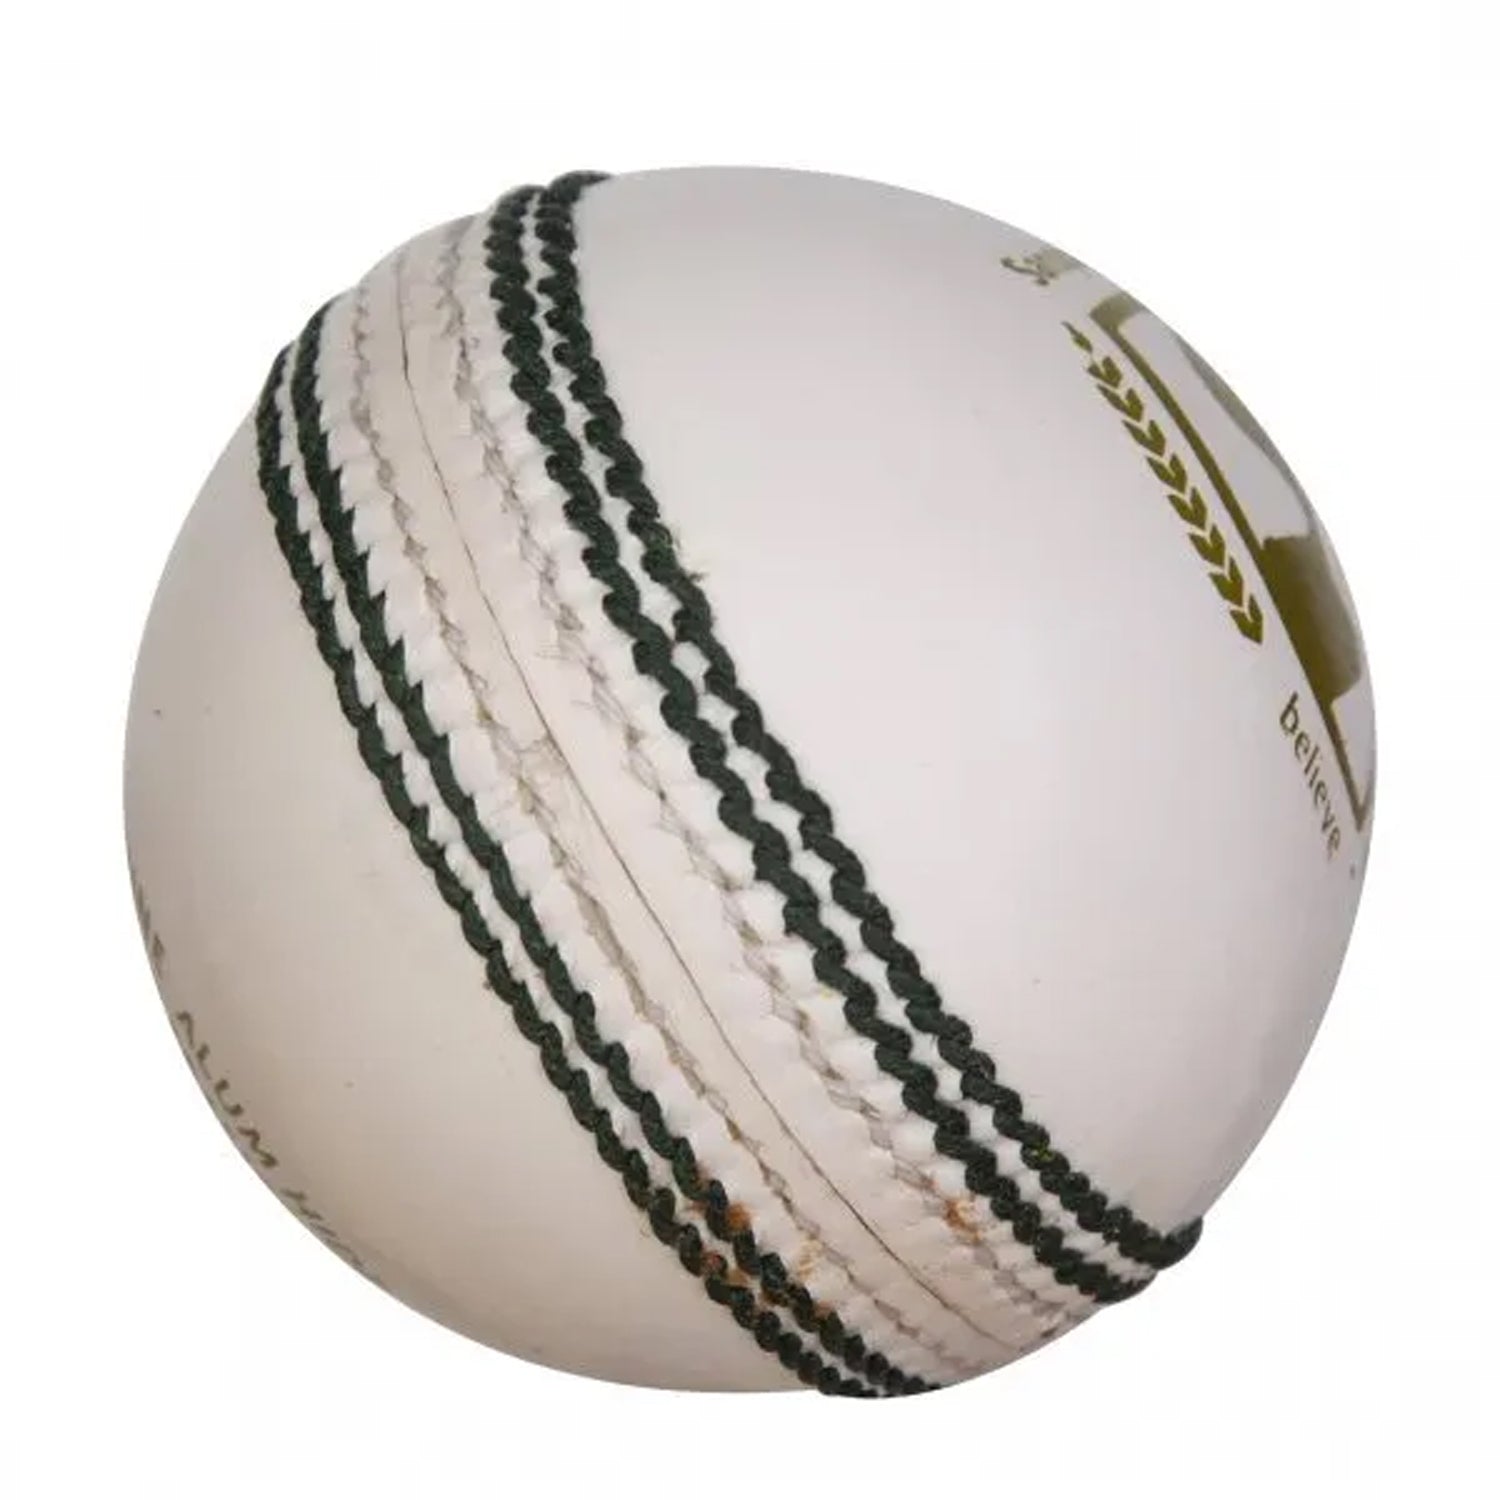 SG Club High Quality Four-Piece Water Proof Cricket Leather Ball, 1PC - Best Price online Prokicksports.com